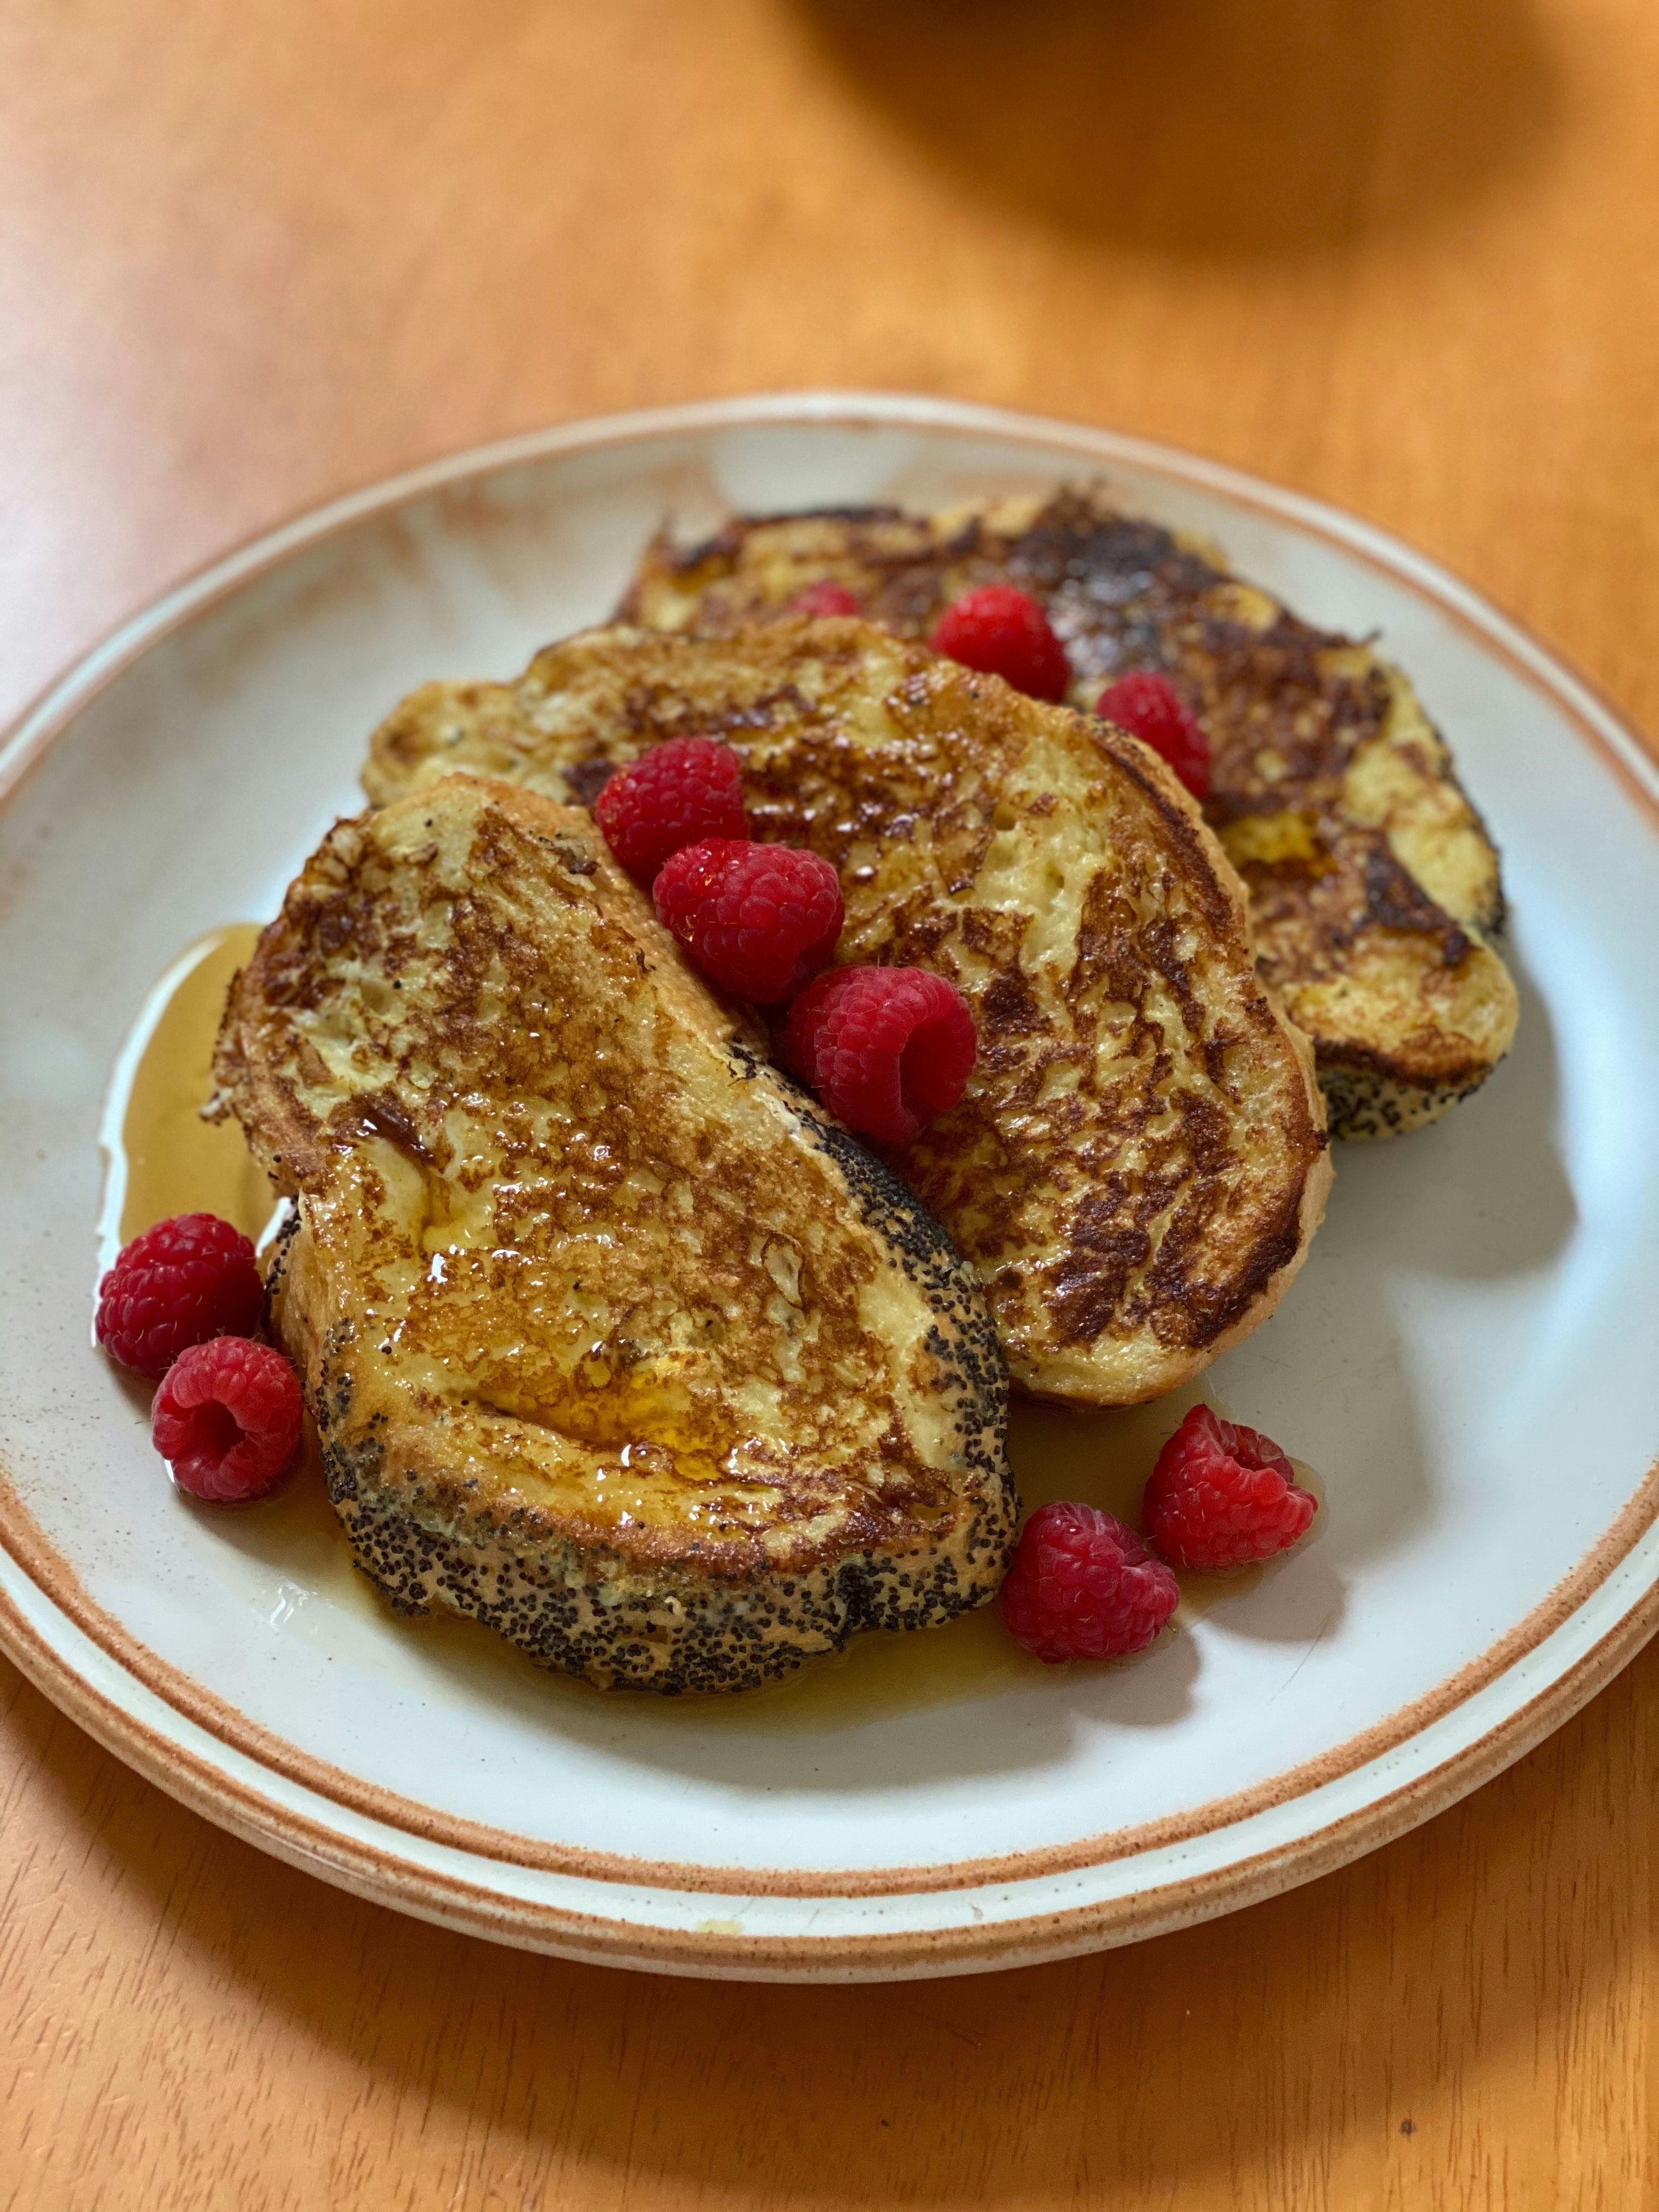 Cover Image for Excuse my french toast